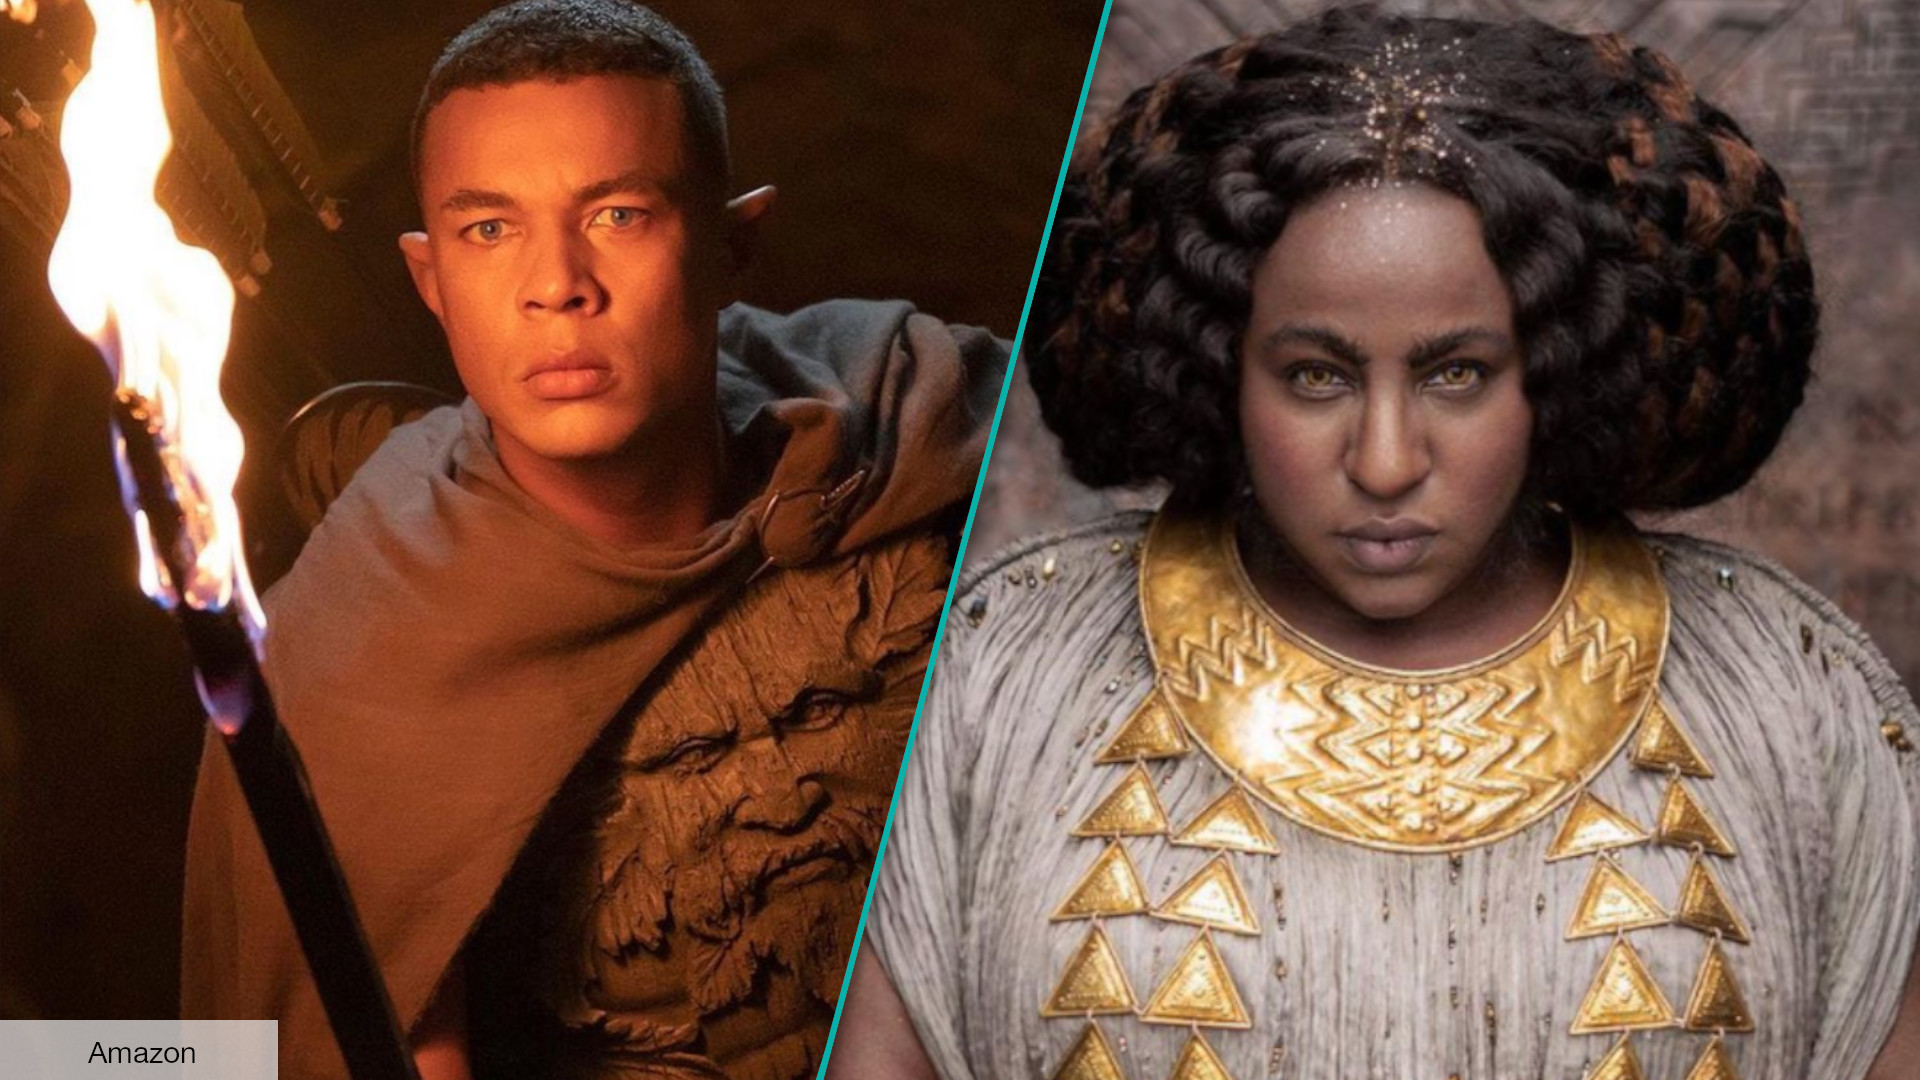 Wonder gastvrouw huren Lord of the Rings TV series creators respond to trolls annoyed by diverse  cast | The Digital Fix